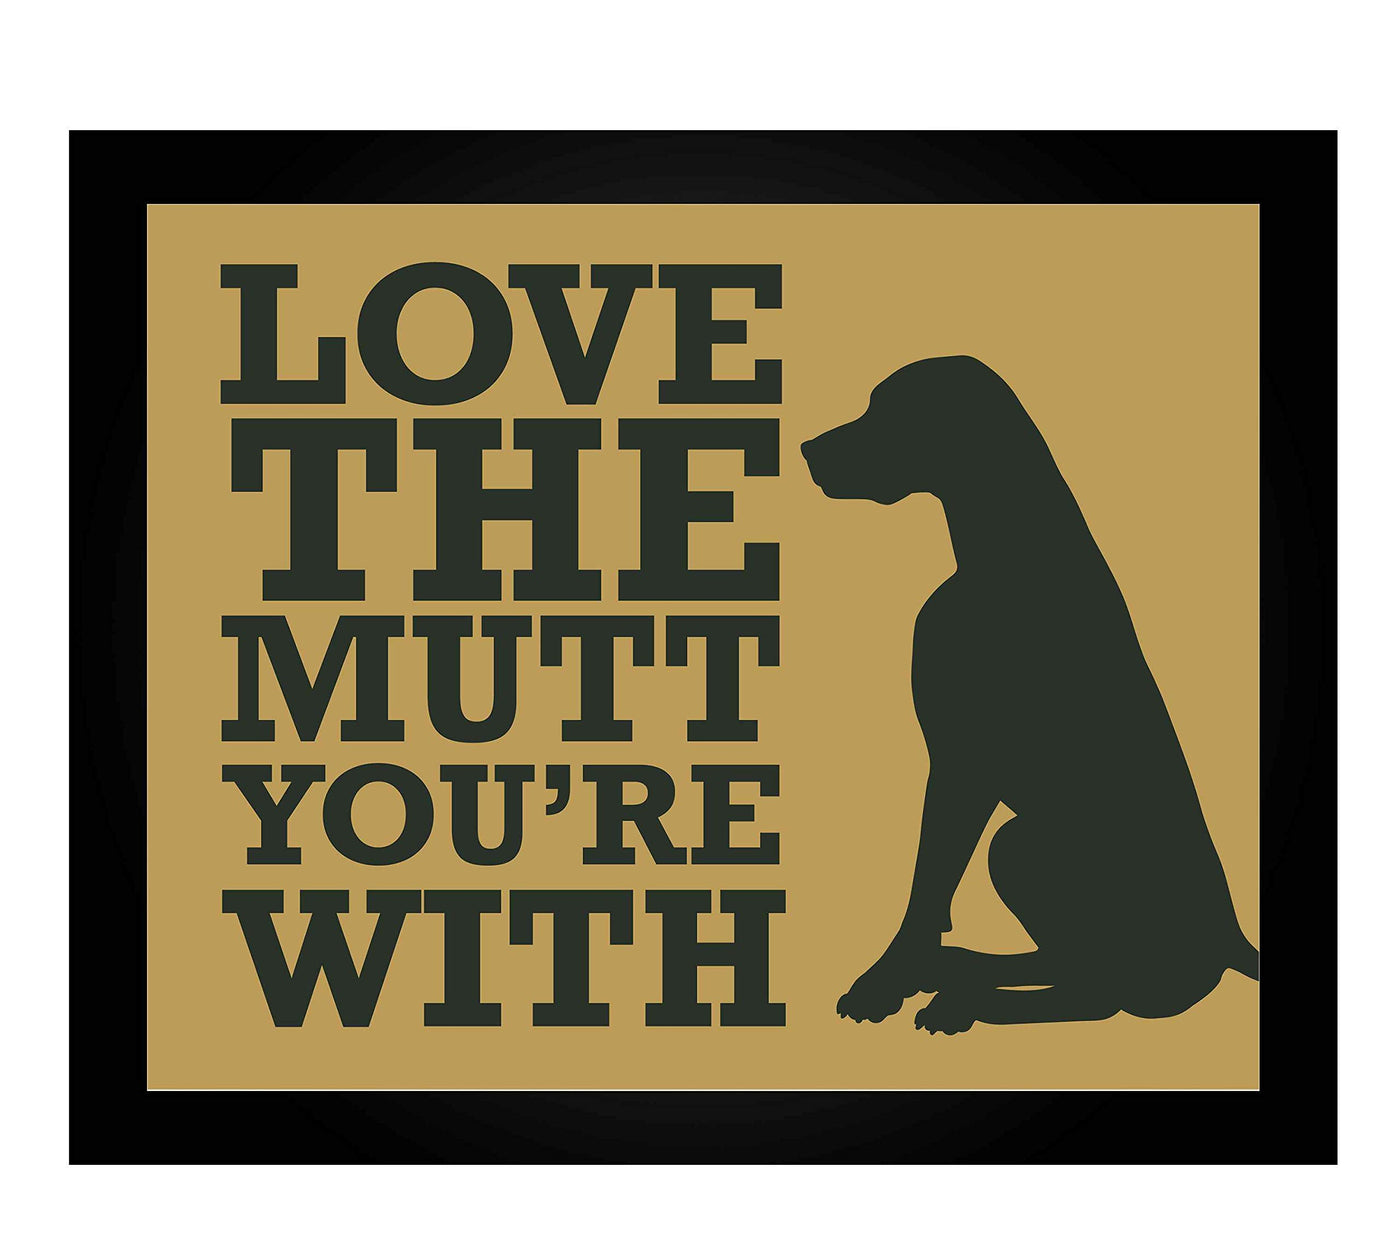 Love The Mutt You're With Funny Dog Sign -10 x 8" Wall Art Print-Ready to Frame. Humorous Rustic Art Print for Home-Kitchen-Vet's Office Decor. Great Welcome Sign and Gift for All Dog Lovers!